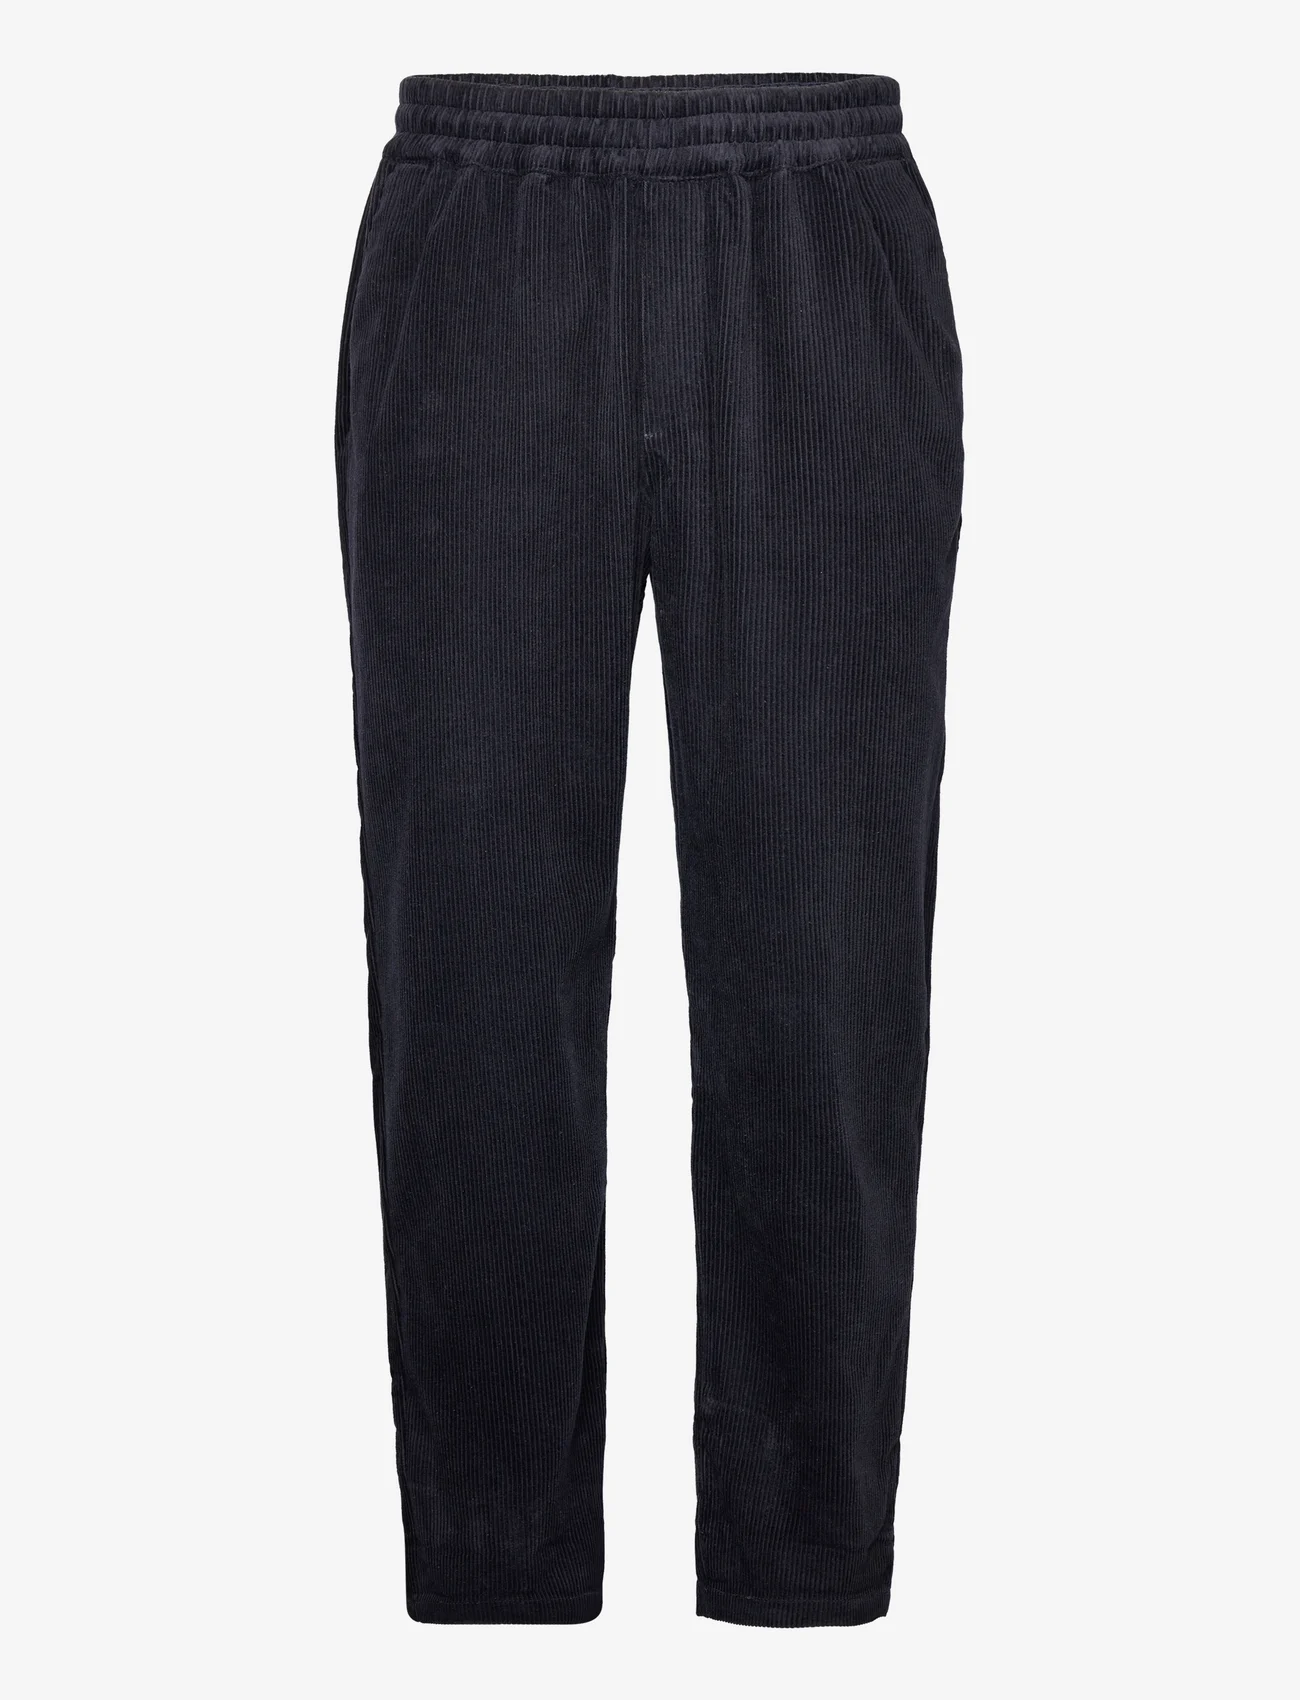 Revolution - Casual Trousers - casual - navy - 0